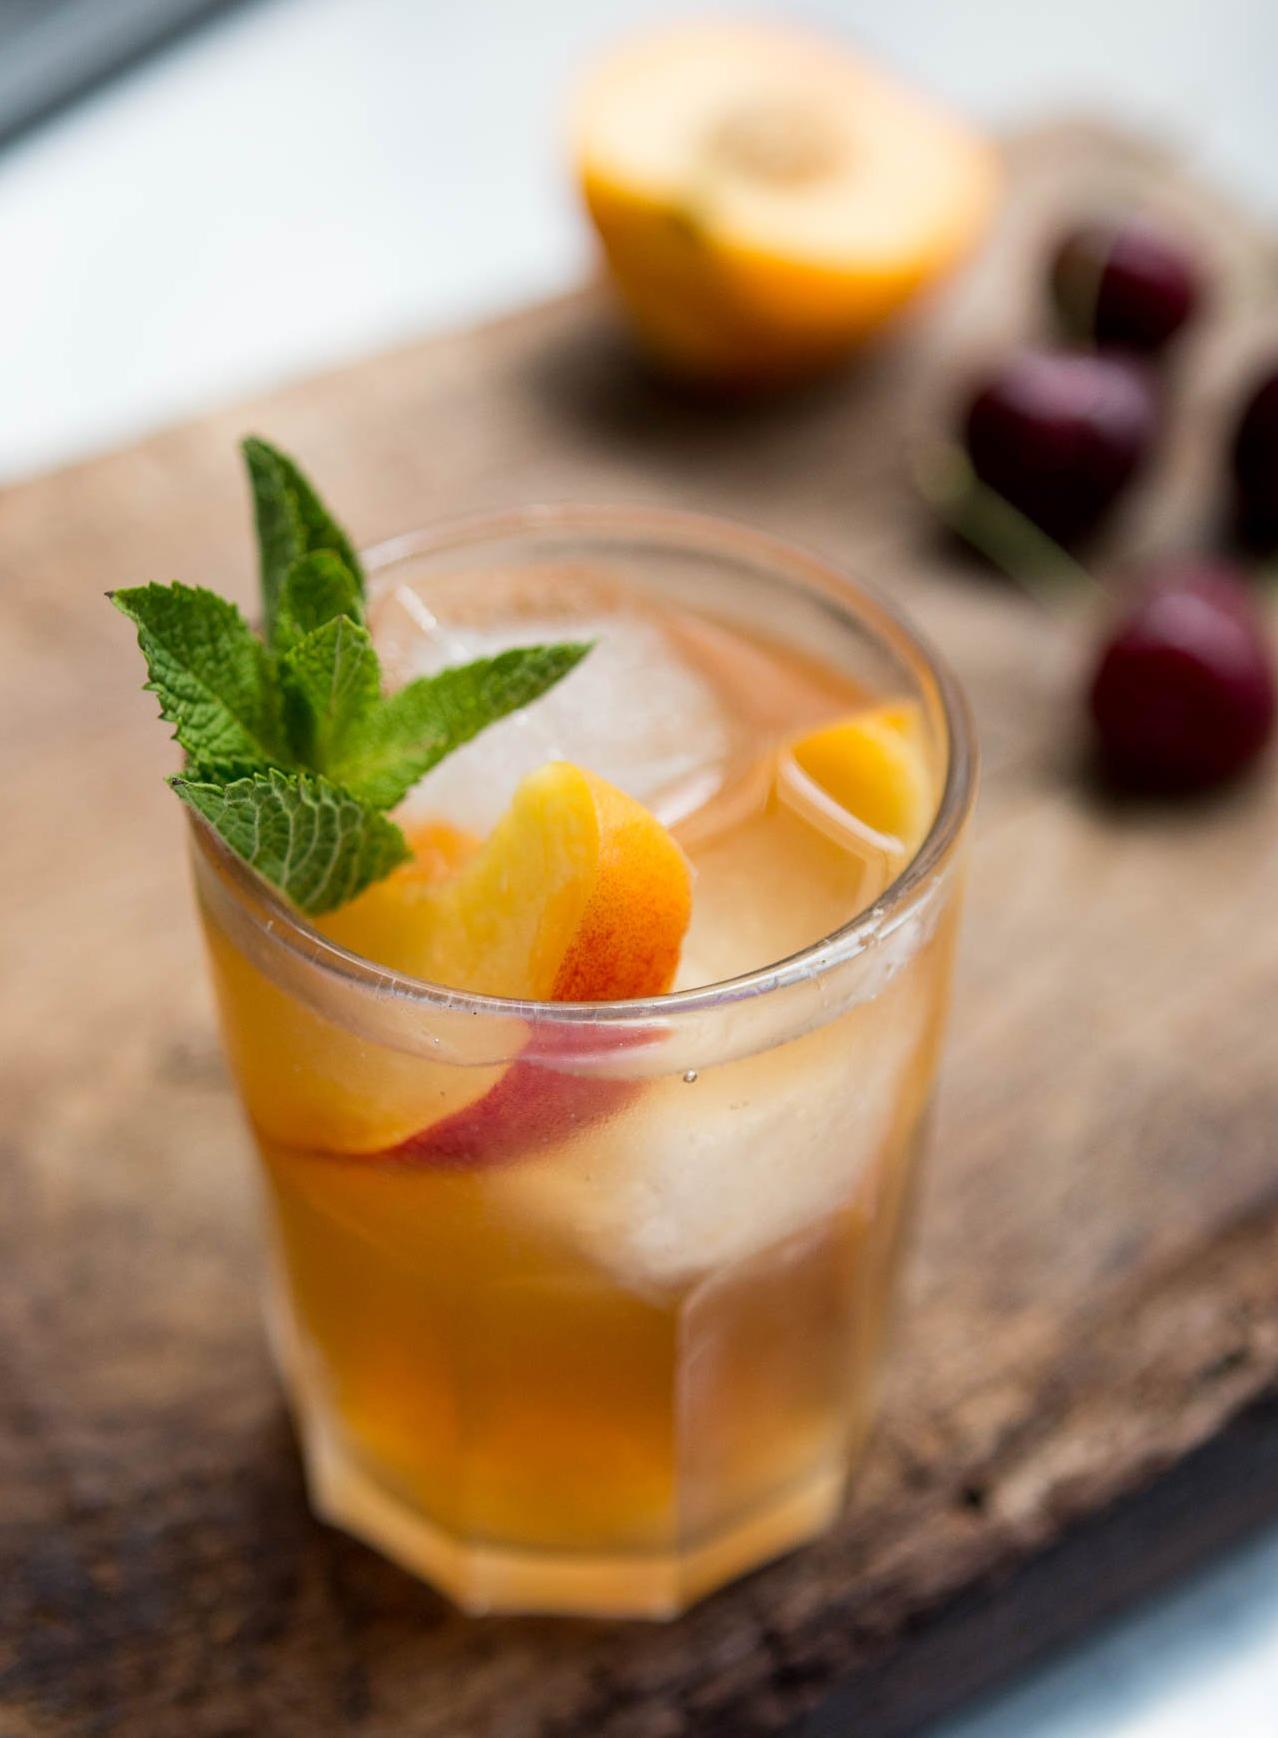  A combination of peach and orange for a delicious twist.